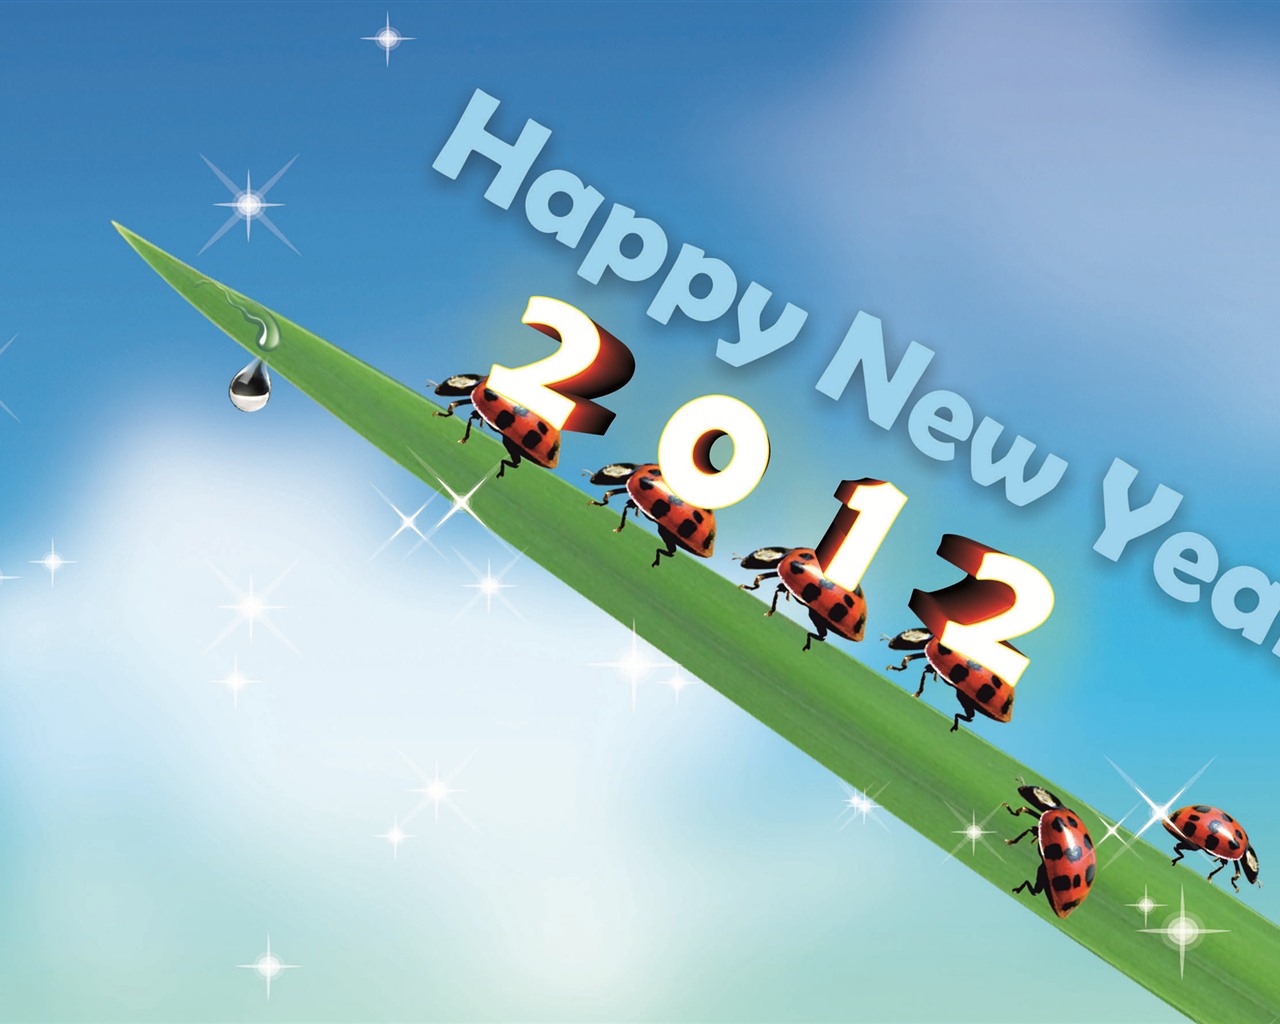 2012 New Year wallpapers (2) #8 - 1280x1024